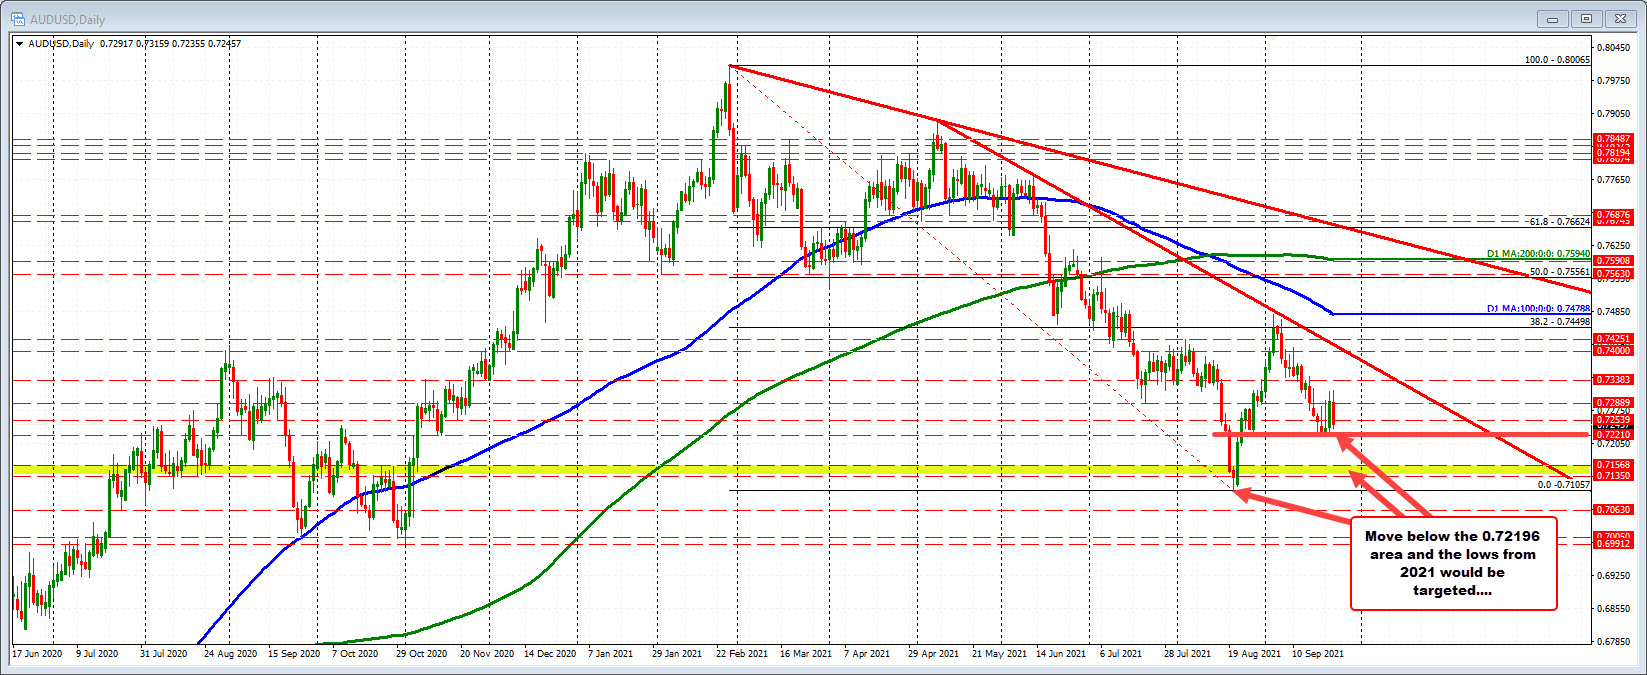 The AUDUSD on the daily chart